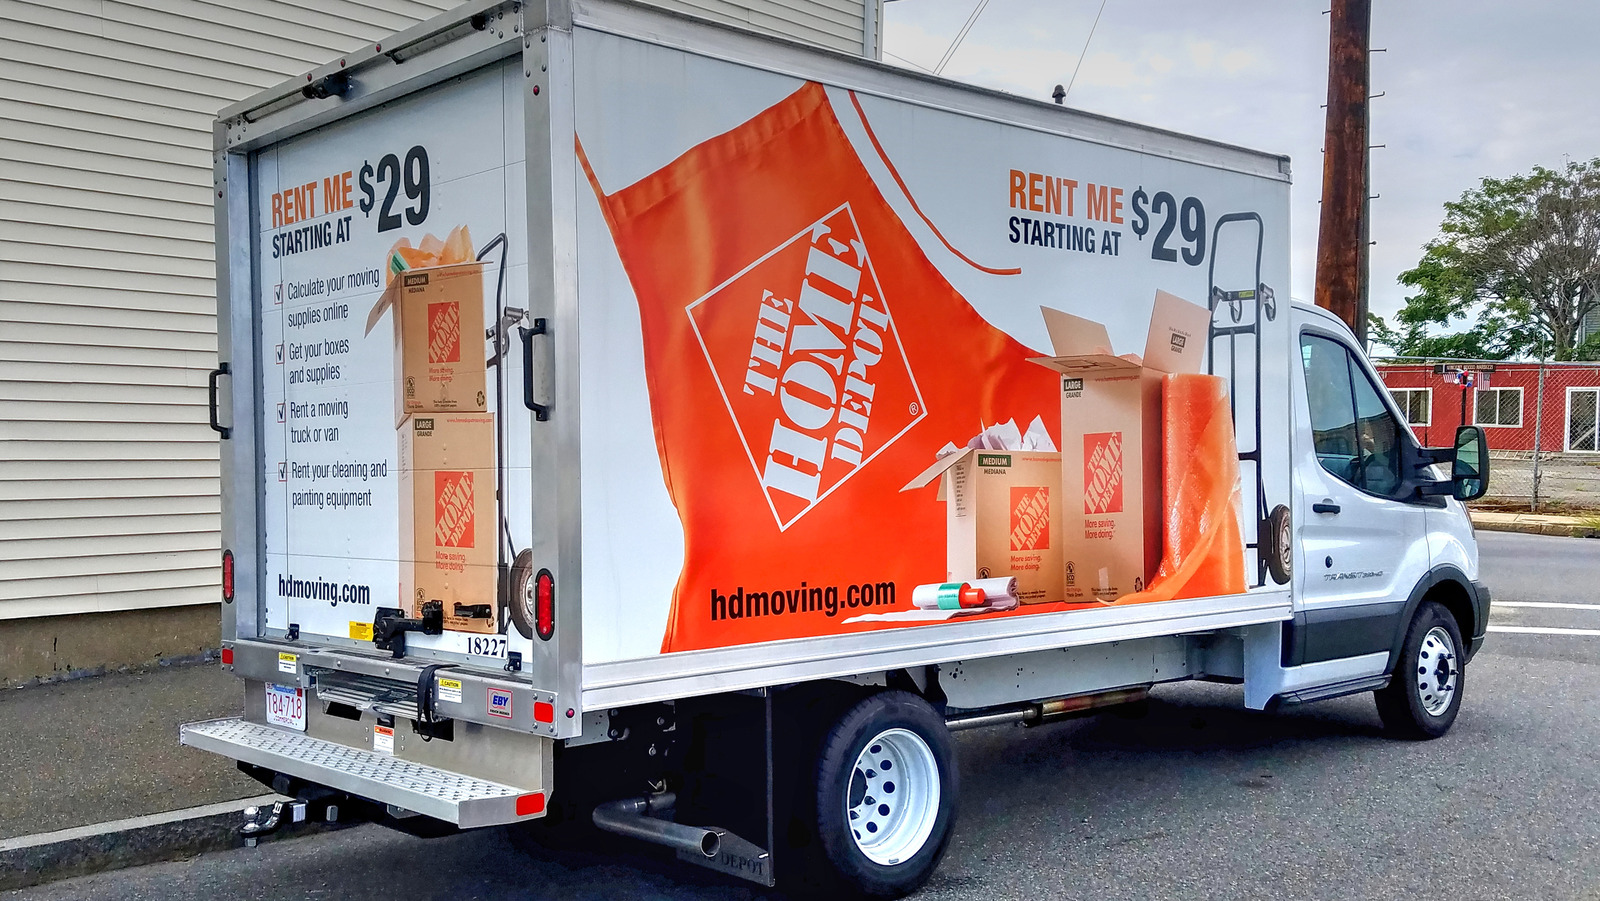 Renting A Truck From Home Depot Is Surprisingly Affordable